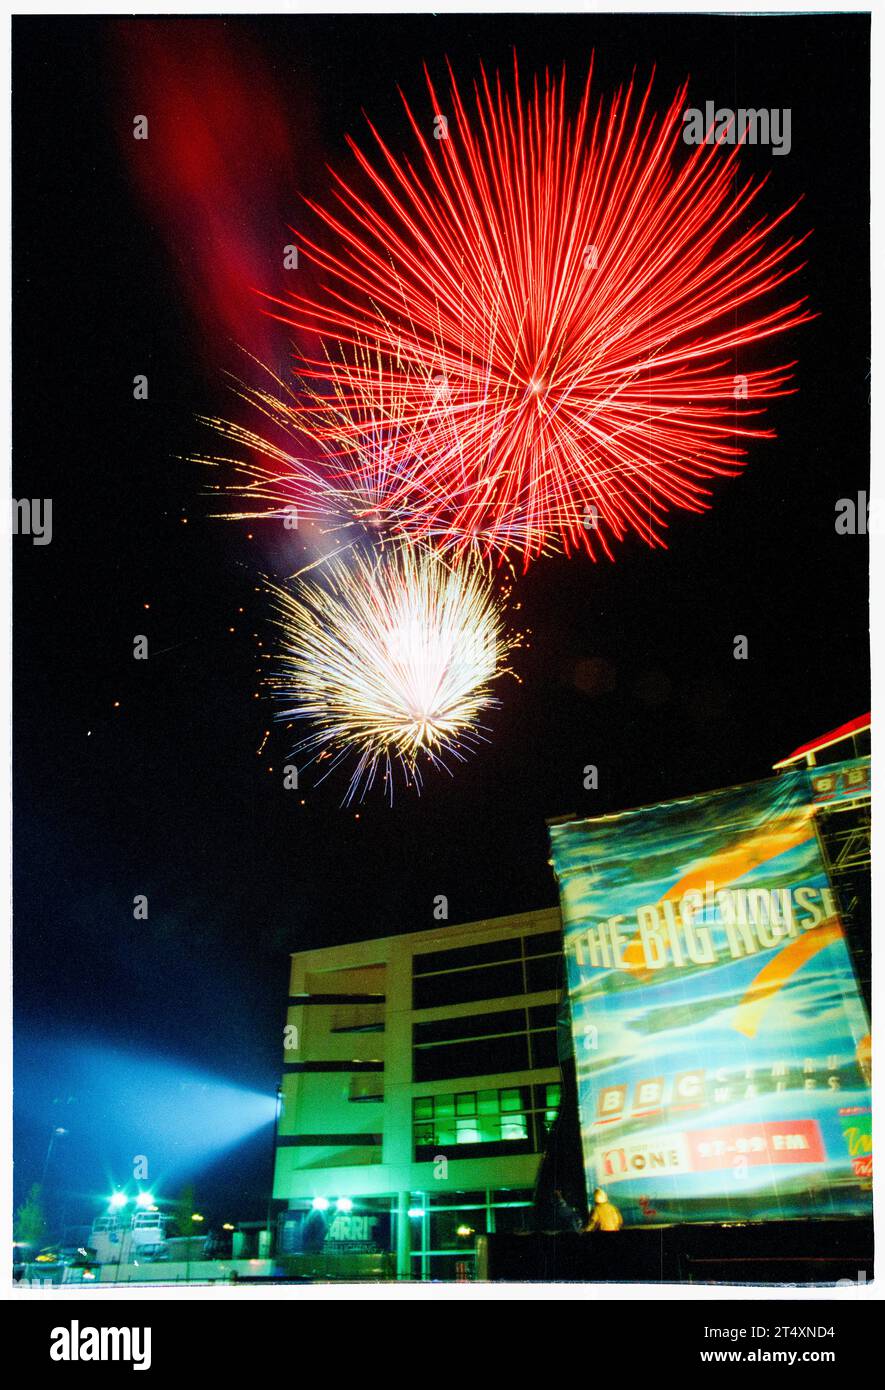 FIREWORKS, CARDIFF, BIG NOISE, 1997: The fireworks display at the climax of the BBC Big Noise Festival in Cardiff Bay, Cardiff, Wales, UK on Sunday, May 11, 1997. Photo: Rob Watkins Stock Photo